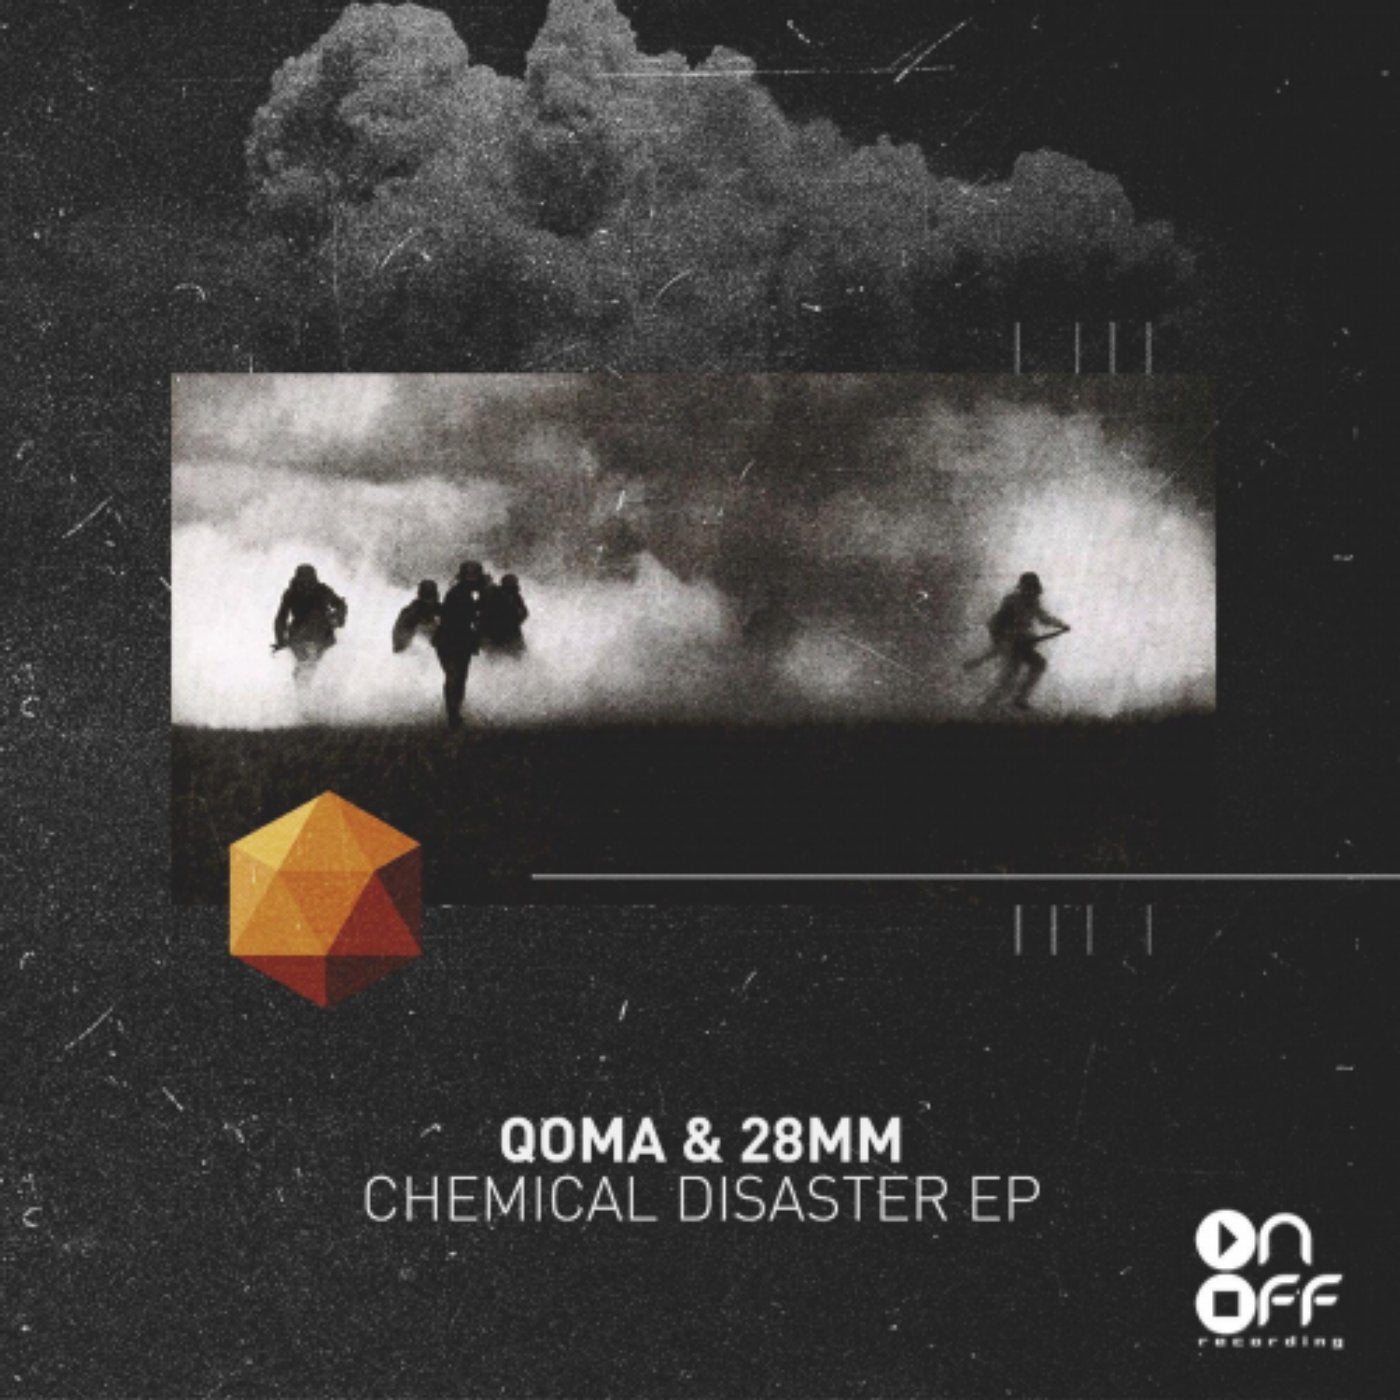 Chemical Disaster EP